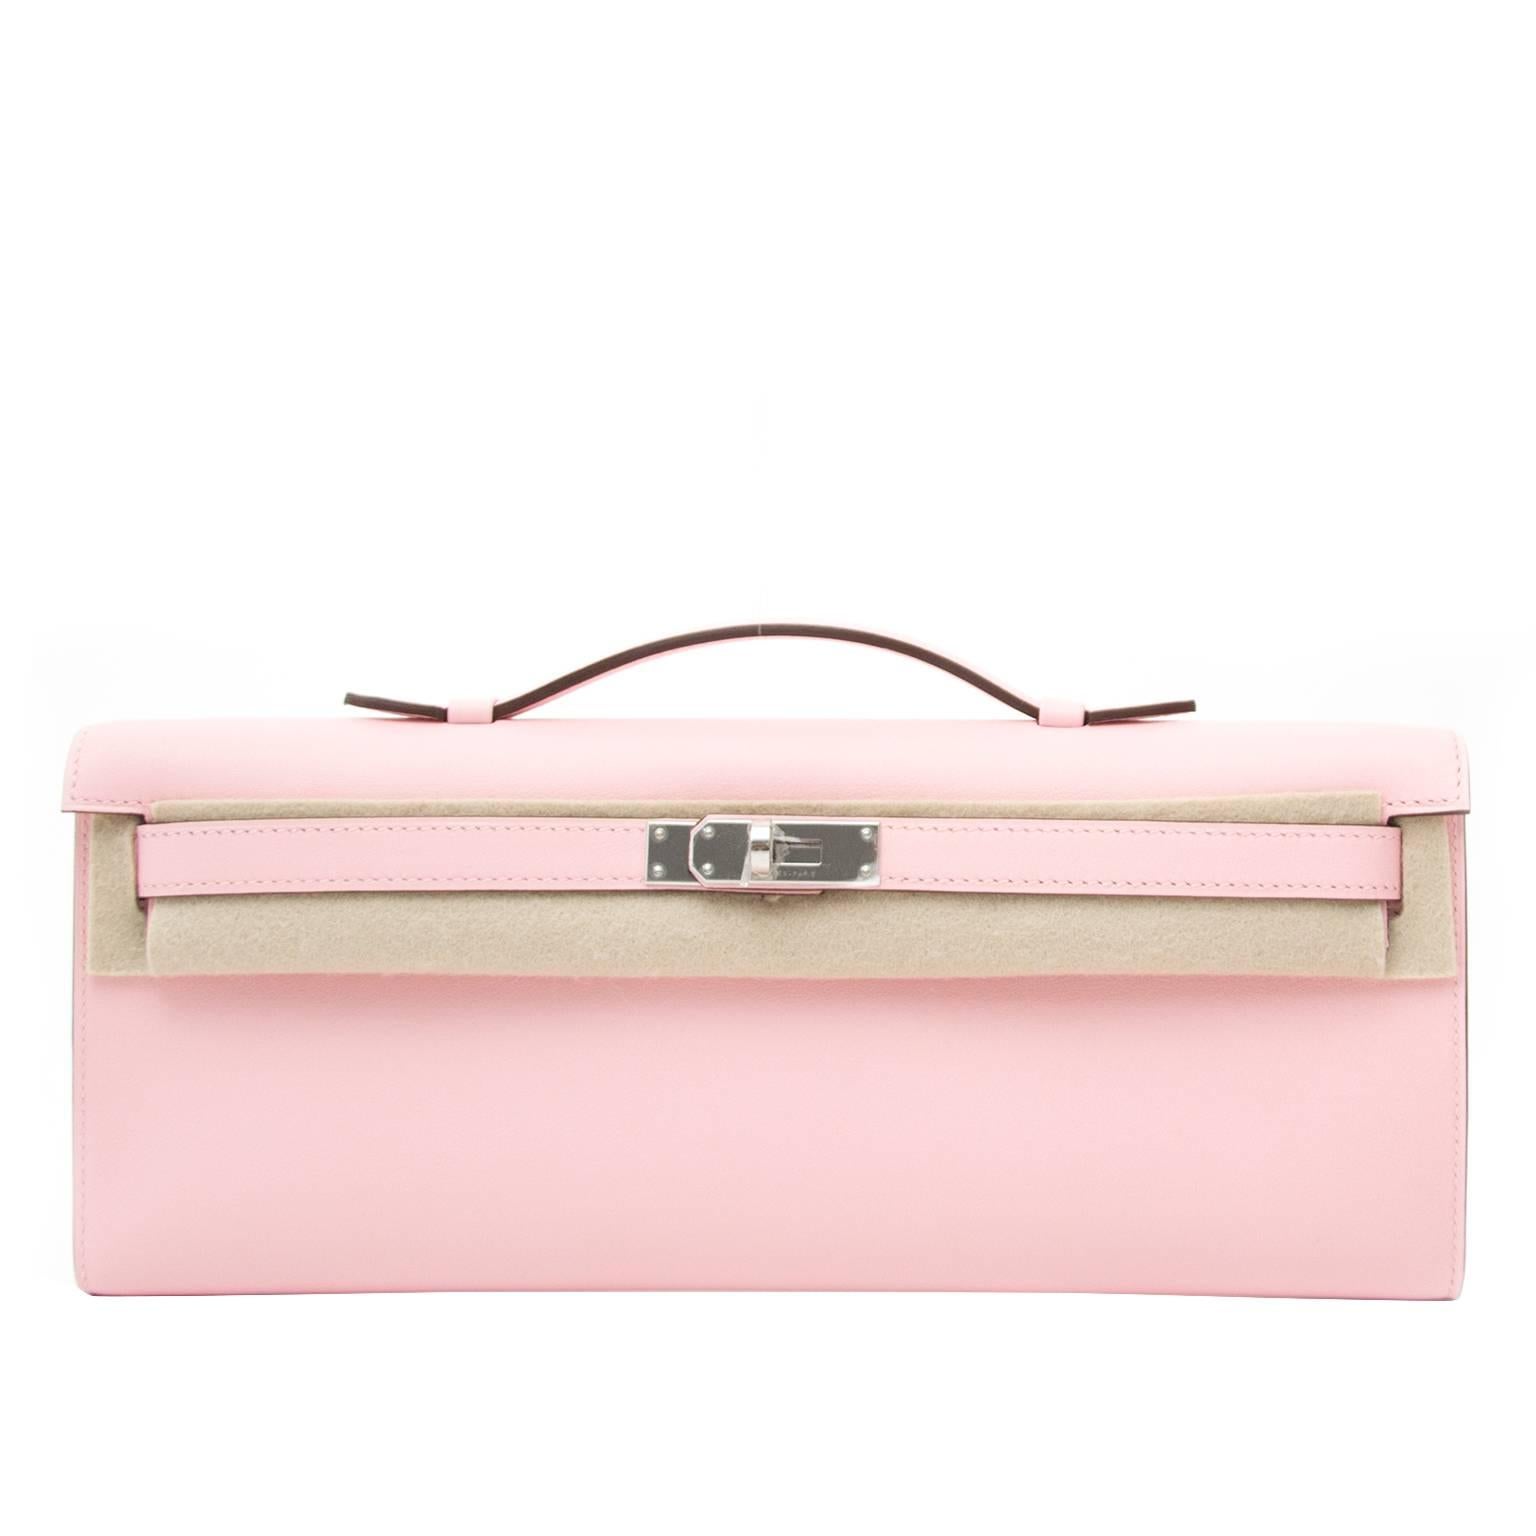 SOLD OUT** NEW HERMES Kelly Cut Clutch. Rose Azalee / PHW. 100